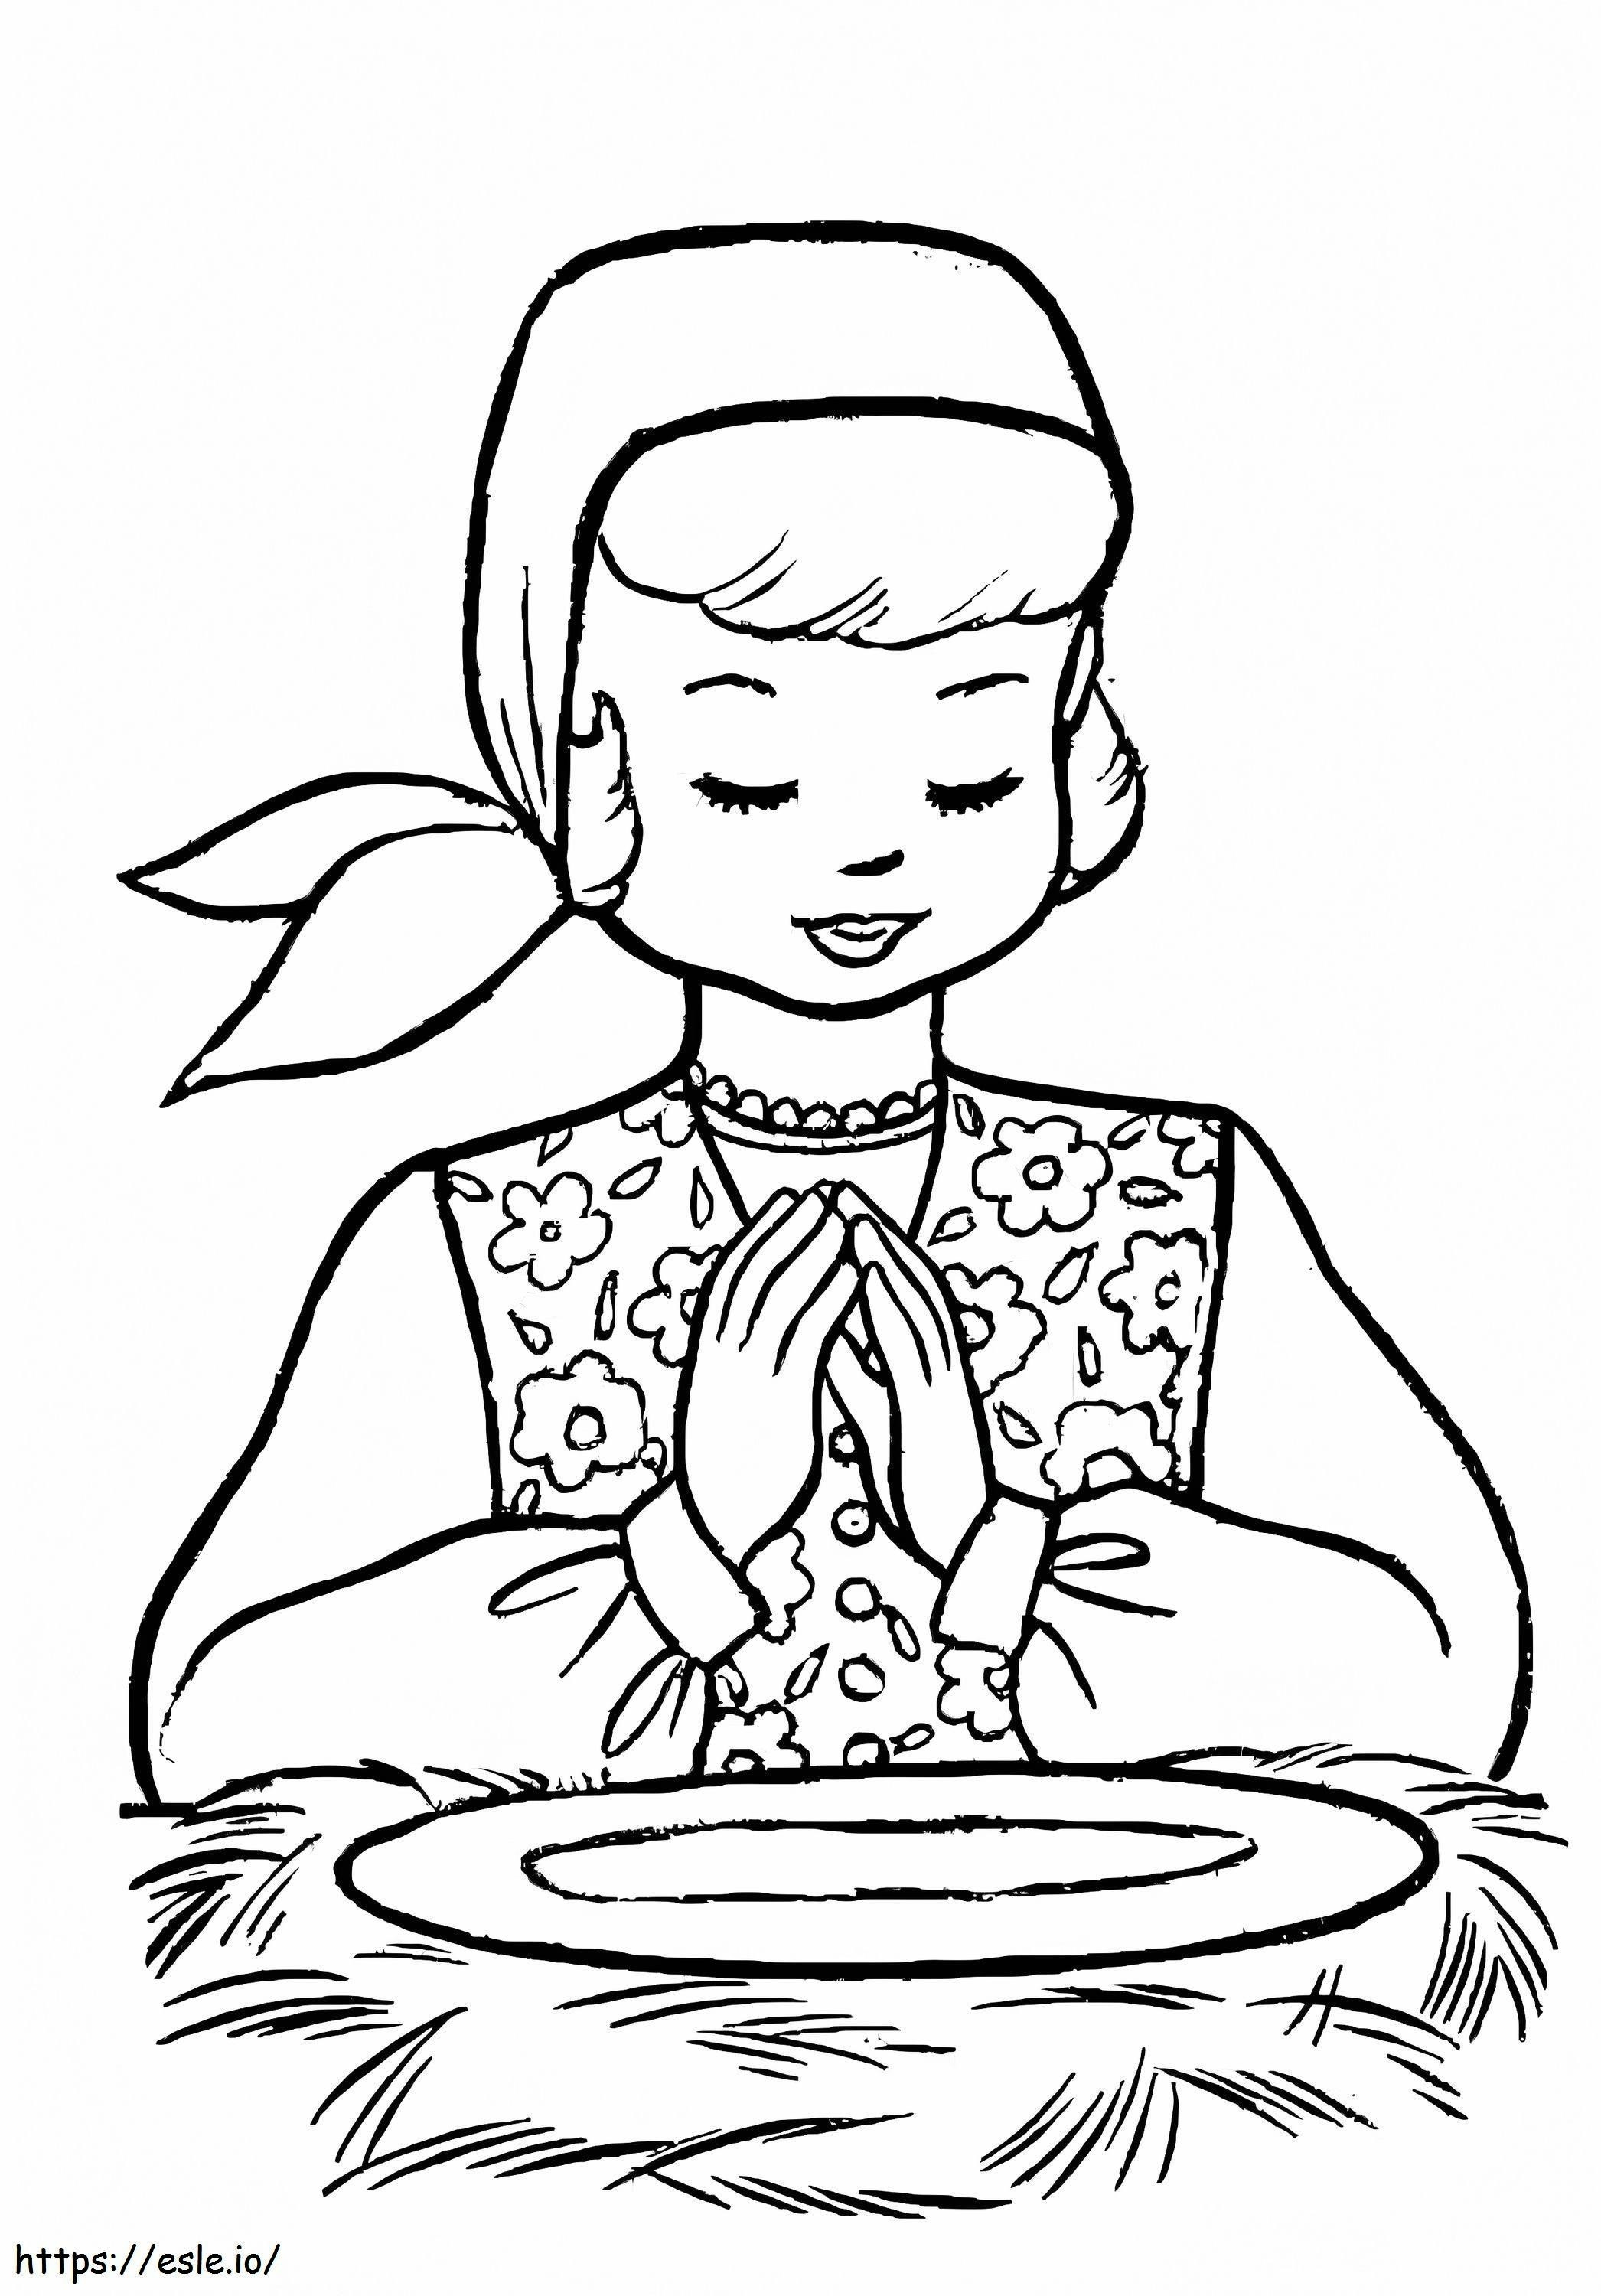 Christmas Eve In Poland coloring page